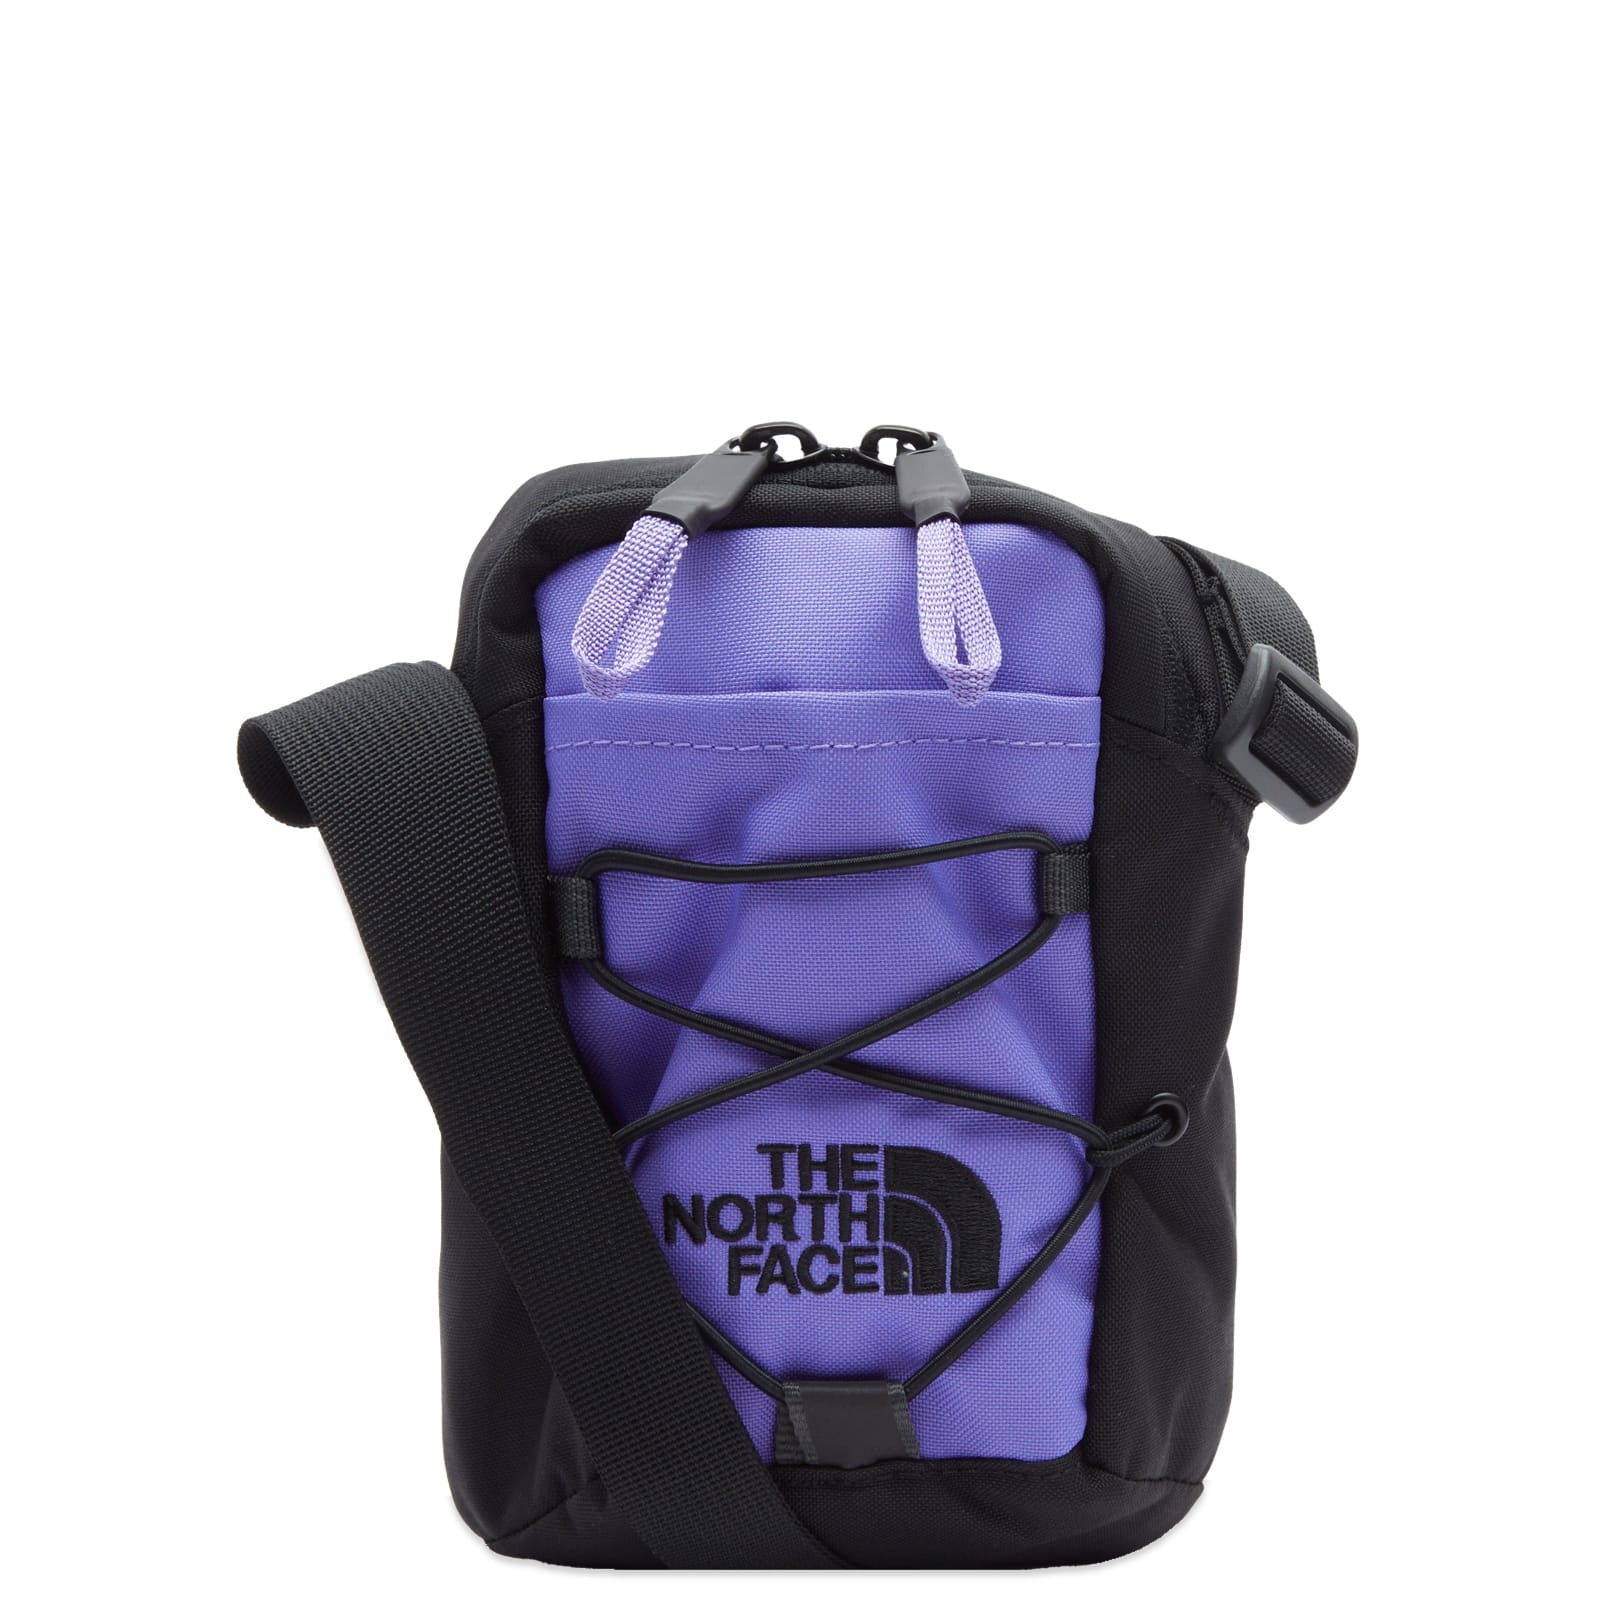 The North Face Jester Crossbody Bag - 1